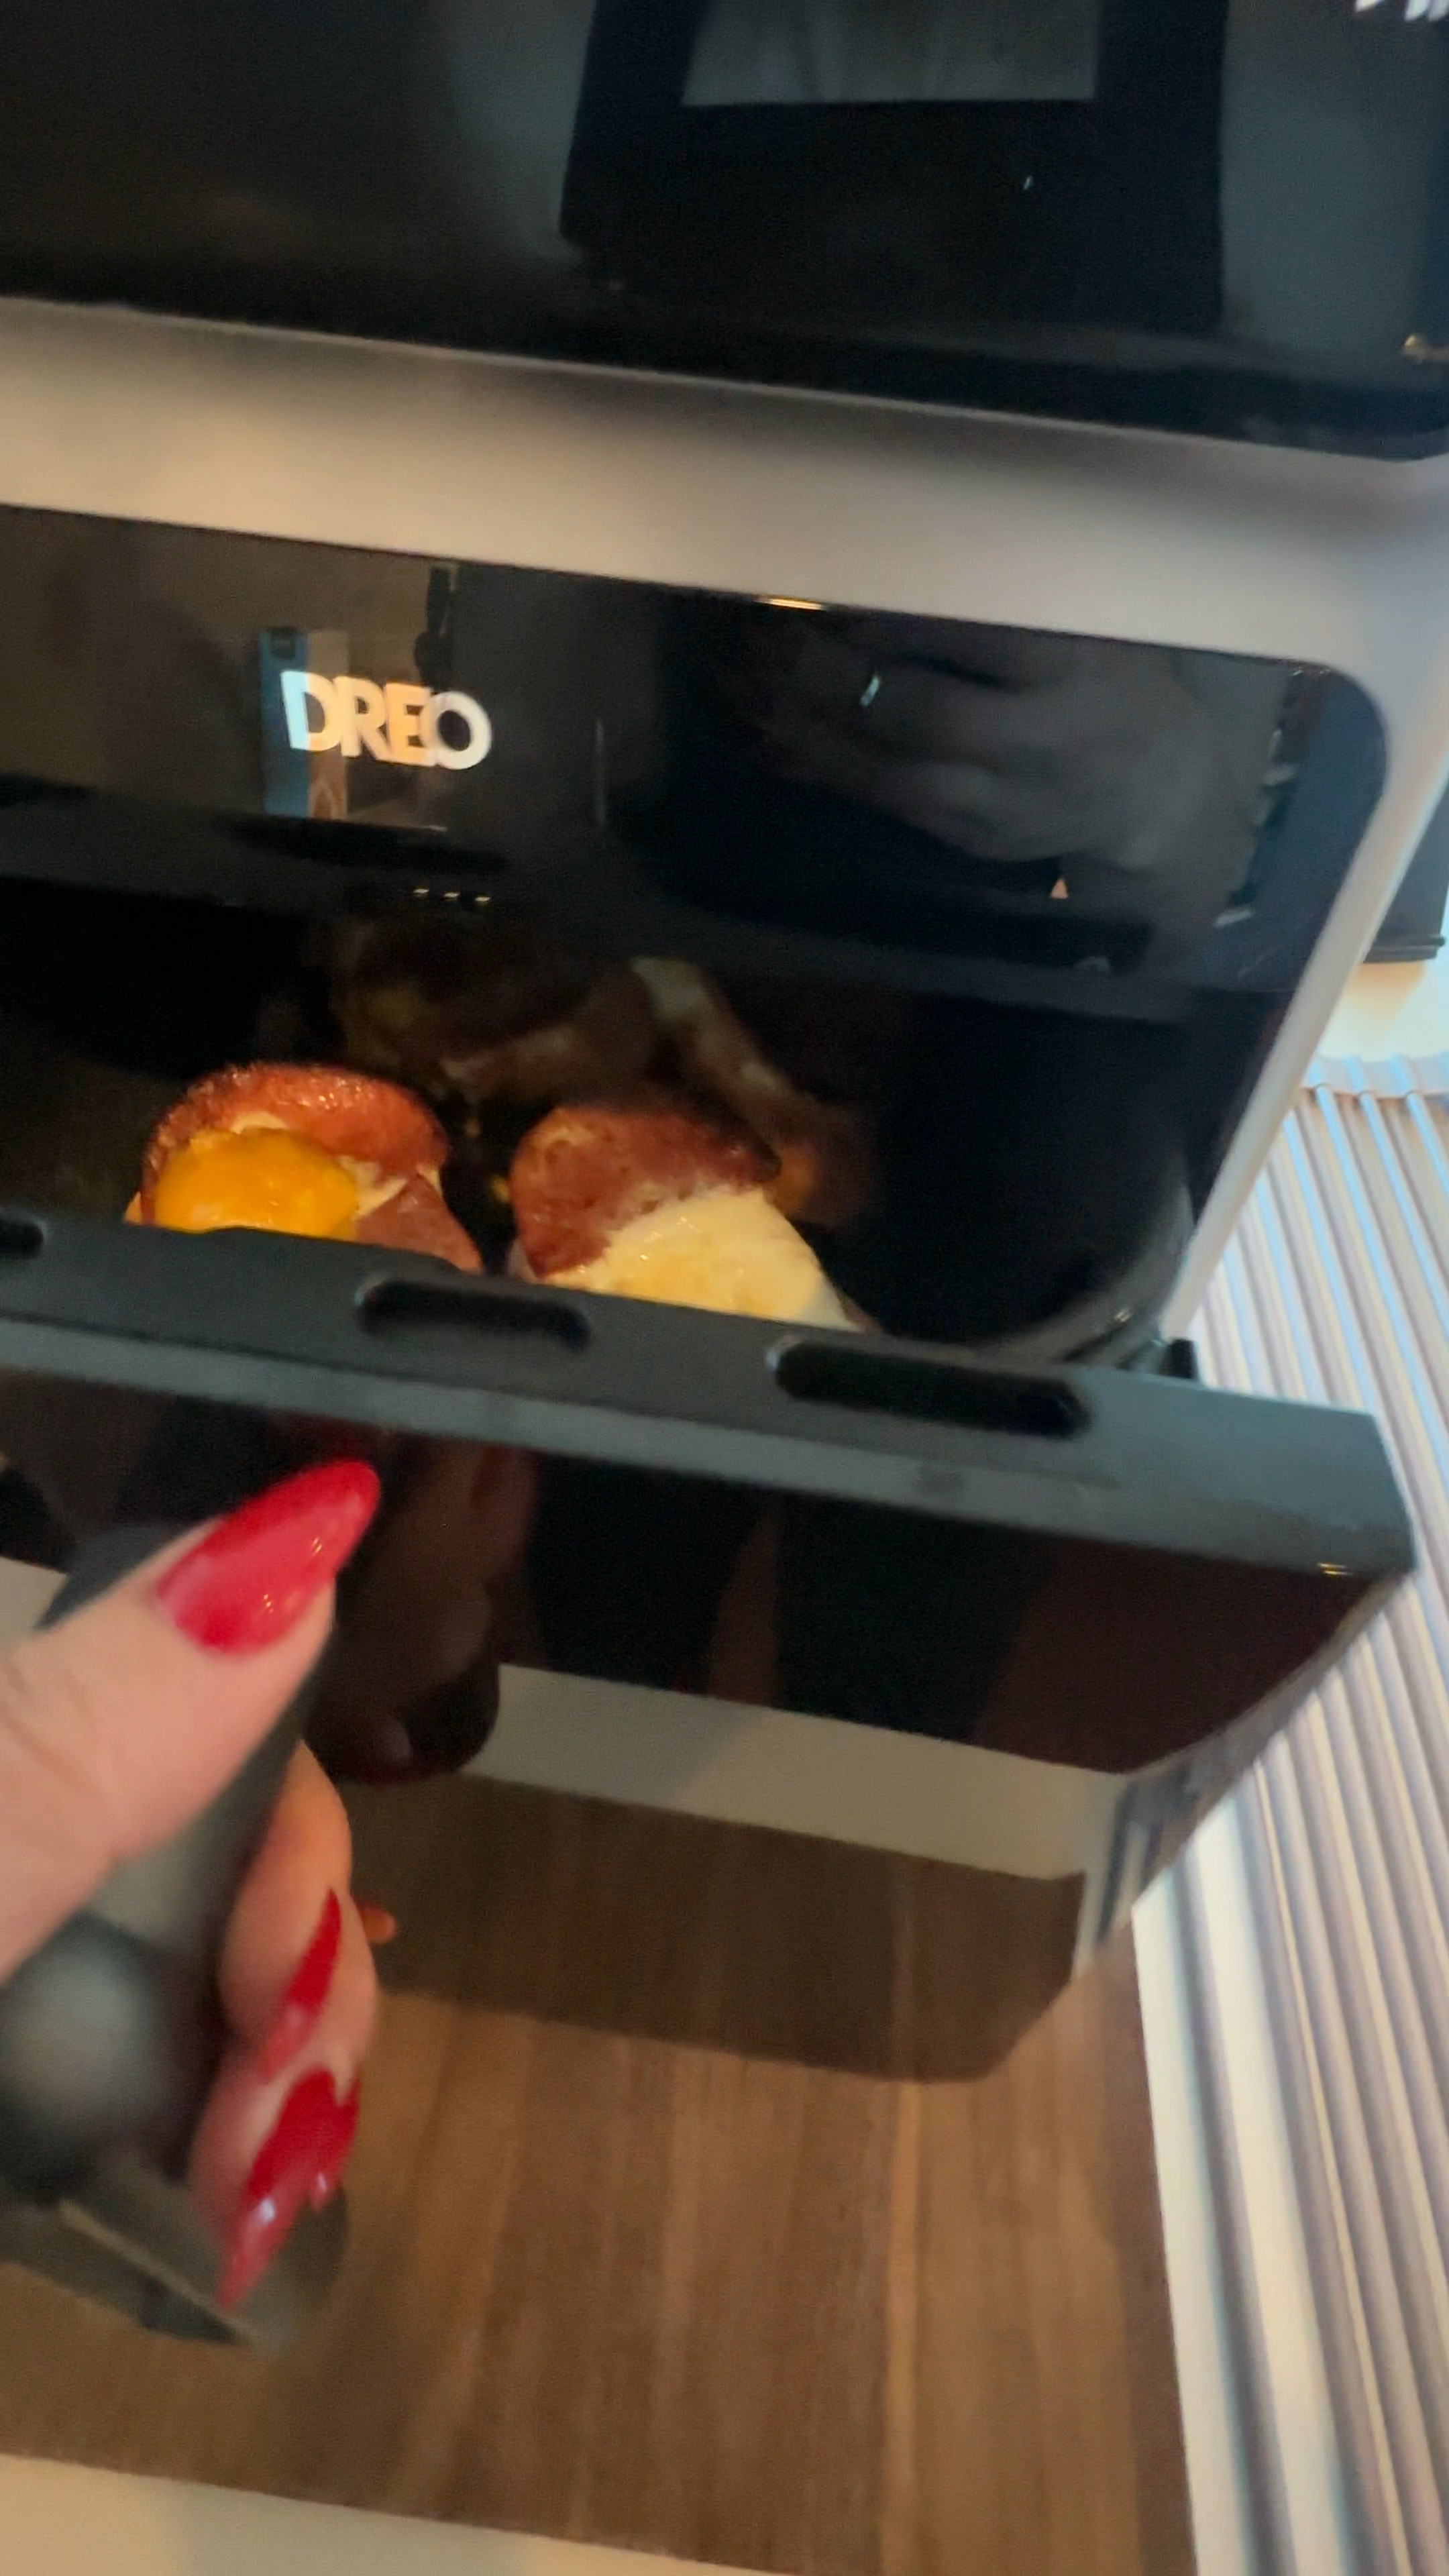 Dreo ChefMaker Combi Fryer, Cook like a pro with just the press of